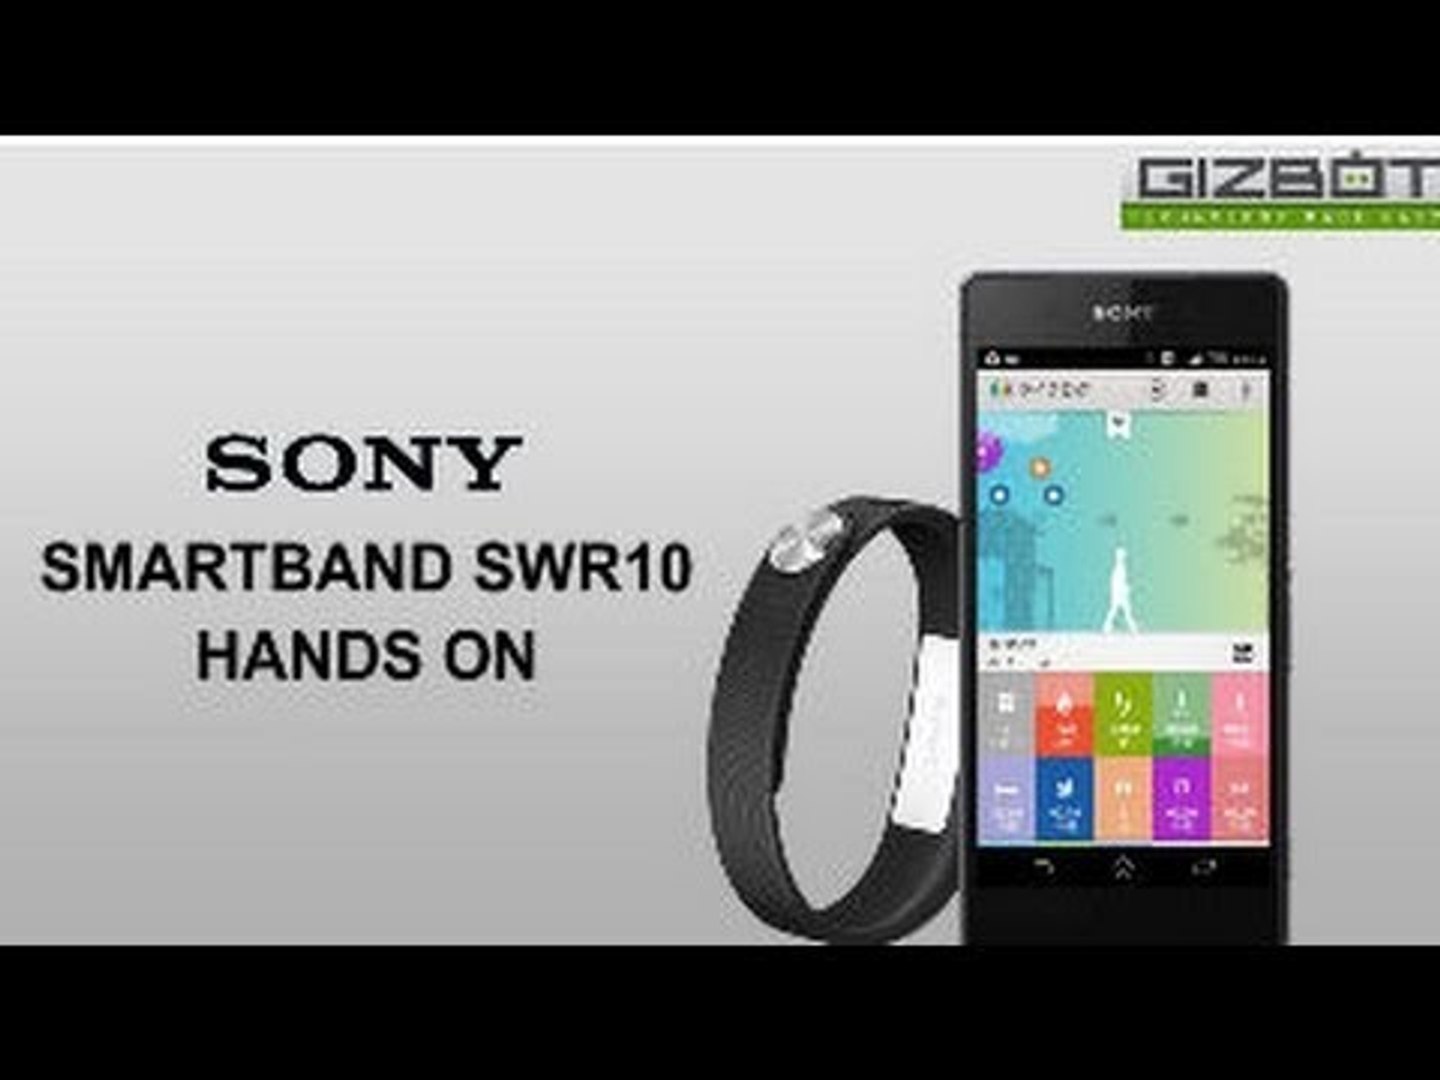 Sony SmartBand SWR10 Hands On - video Dailymotion